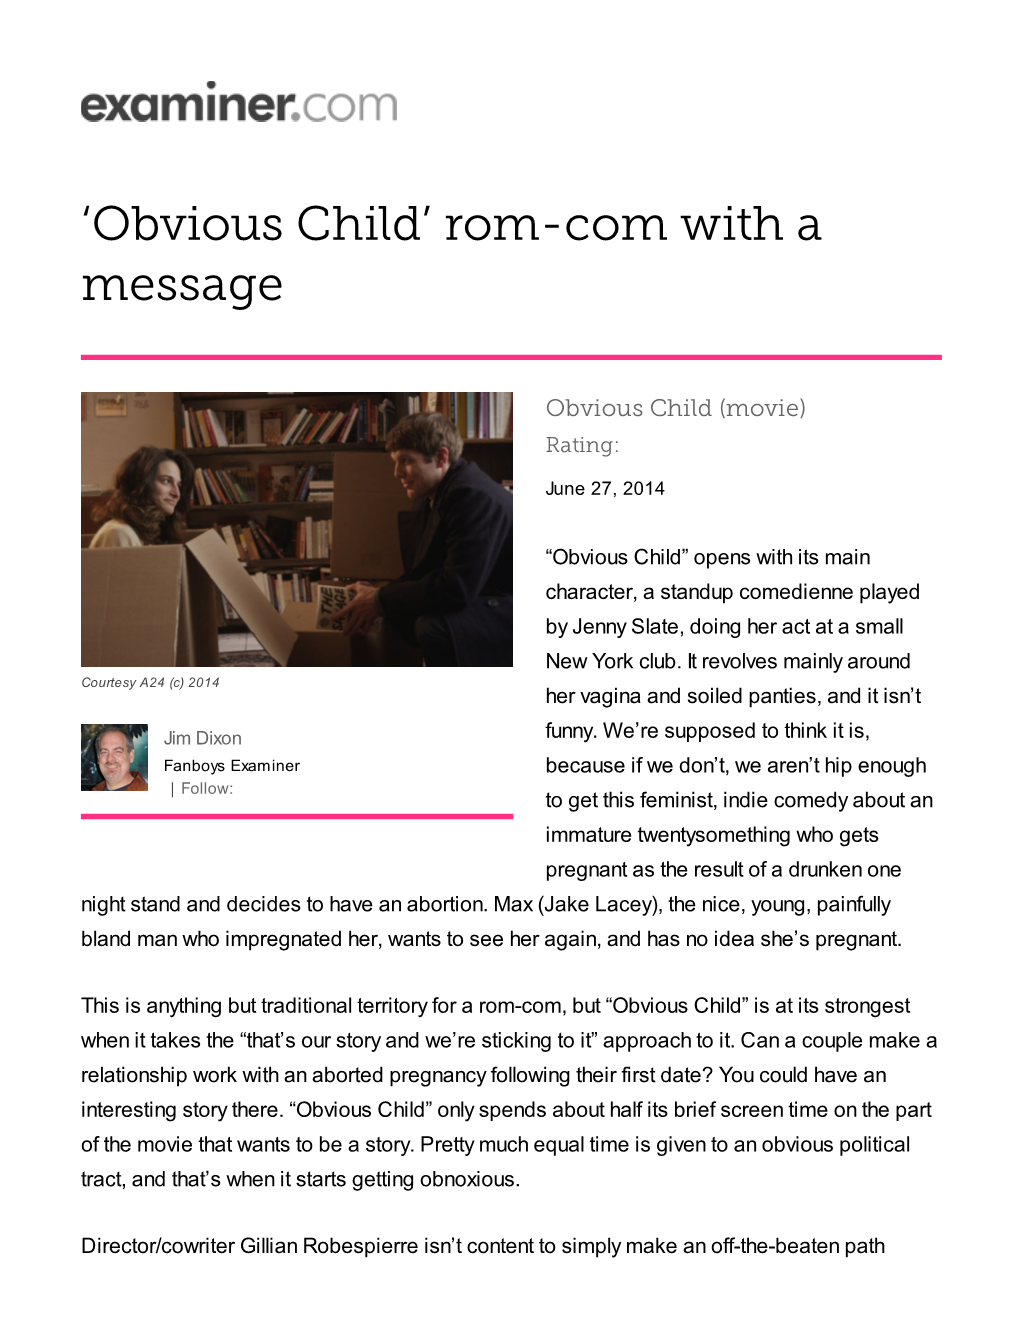 Obvious Child’ Rom-Com with a Message